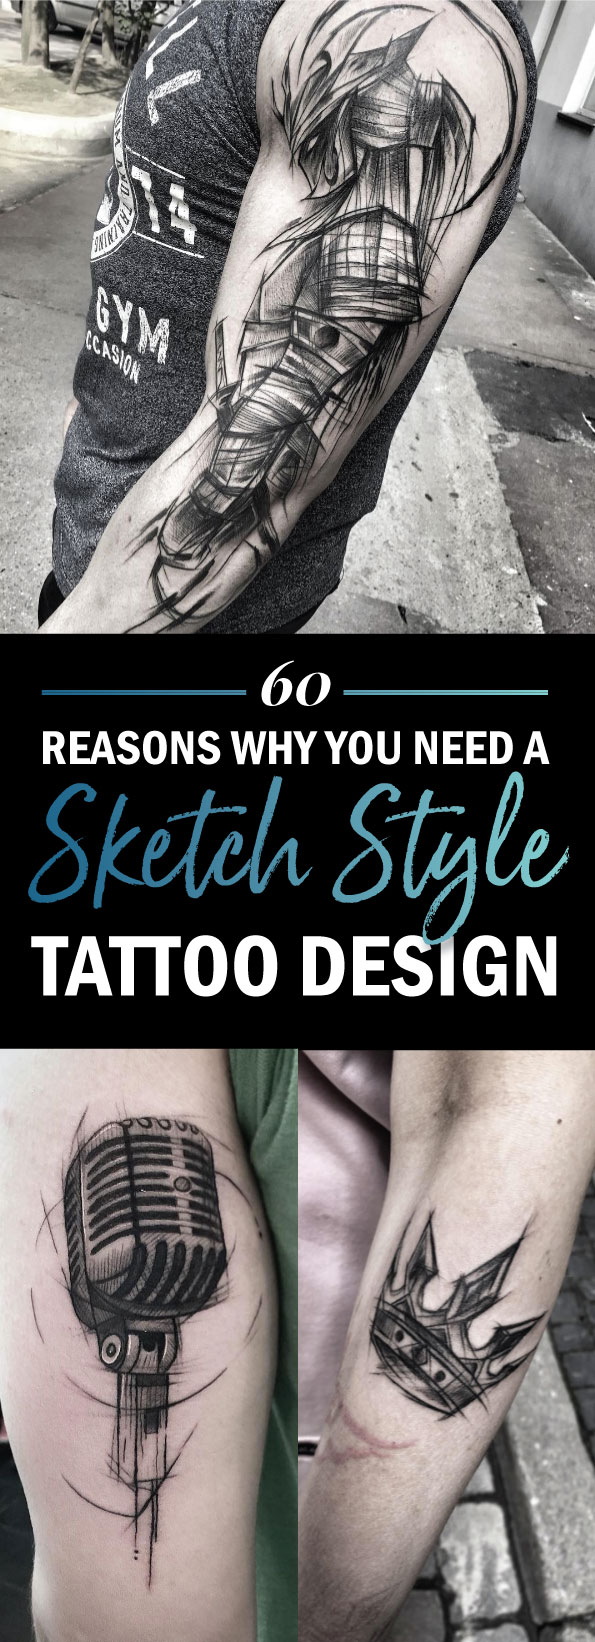 60 Reasons Why You Need A Sketched Tattoo Design